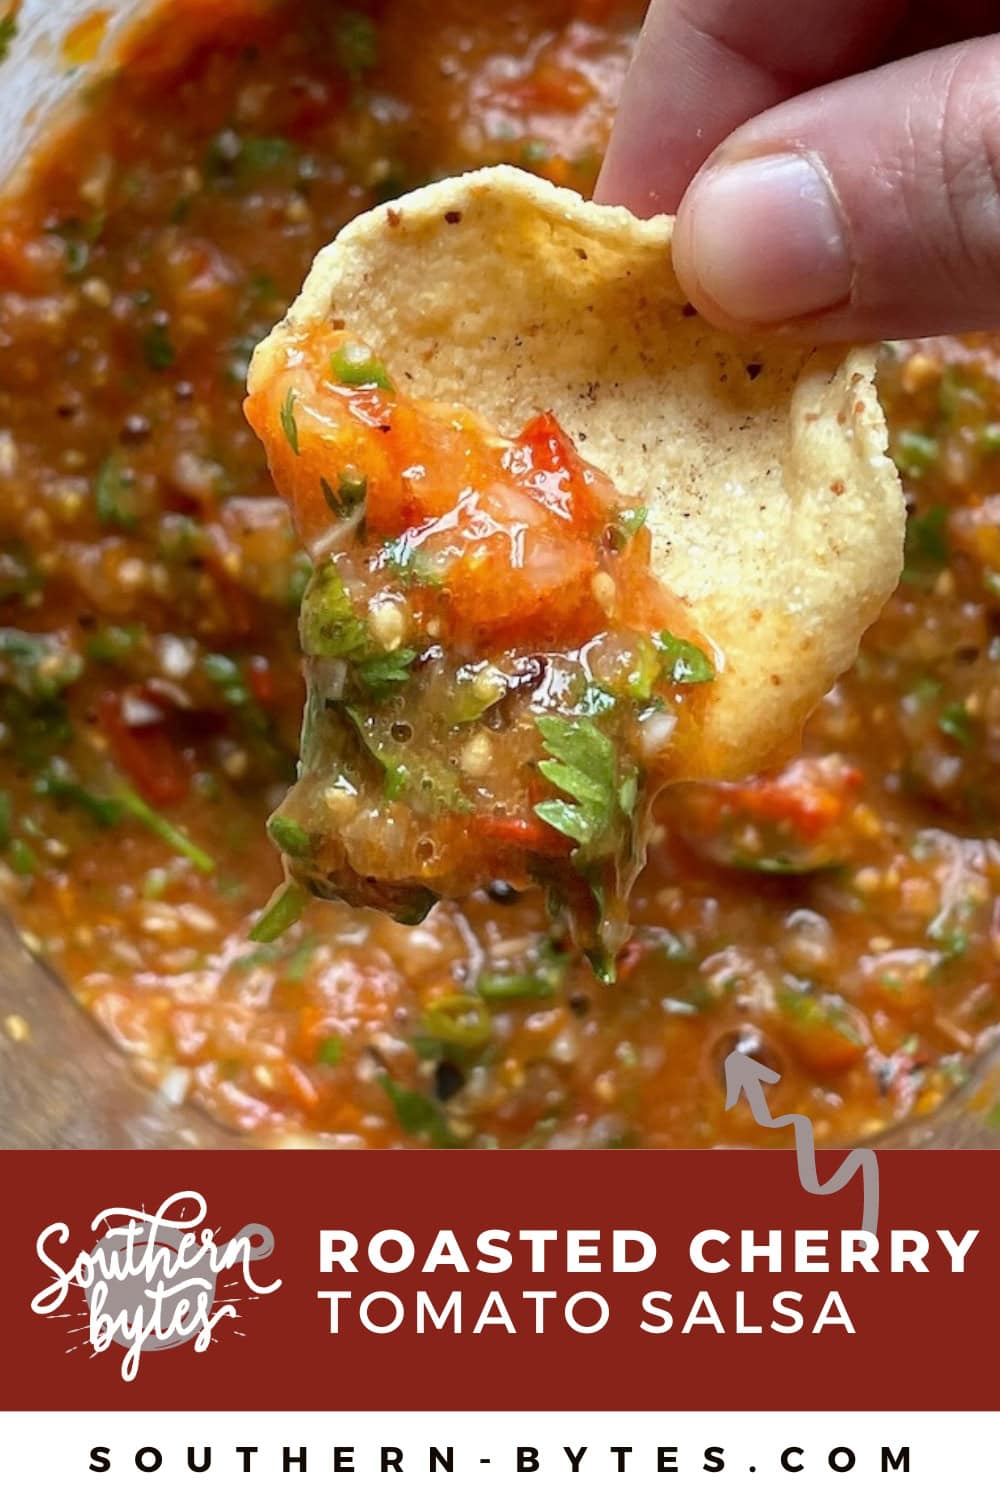 A pin image of a hand scooping some fire-roasted cherry tomato salsa up with a chip.